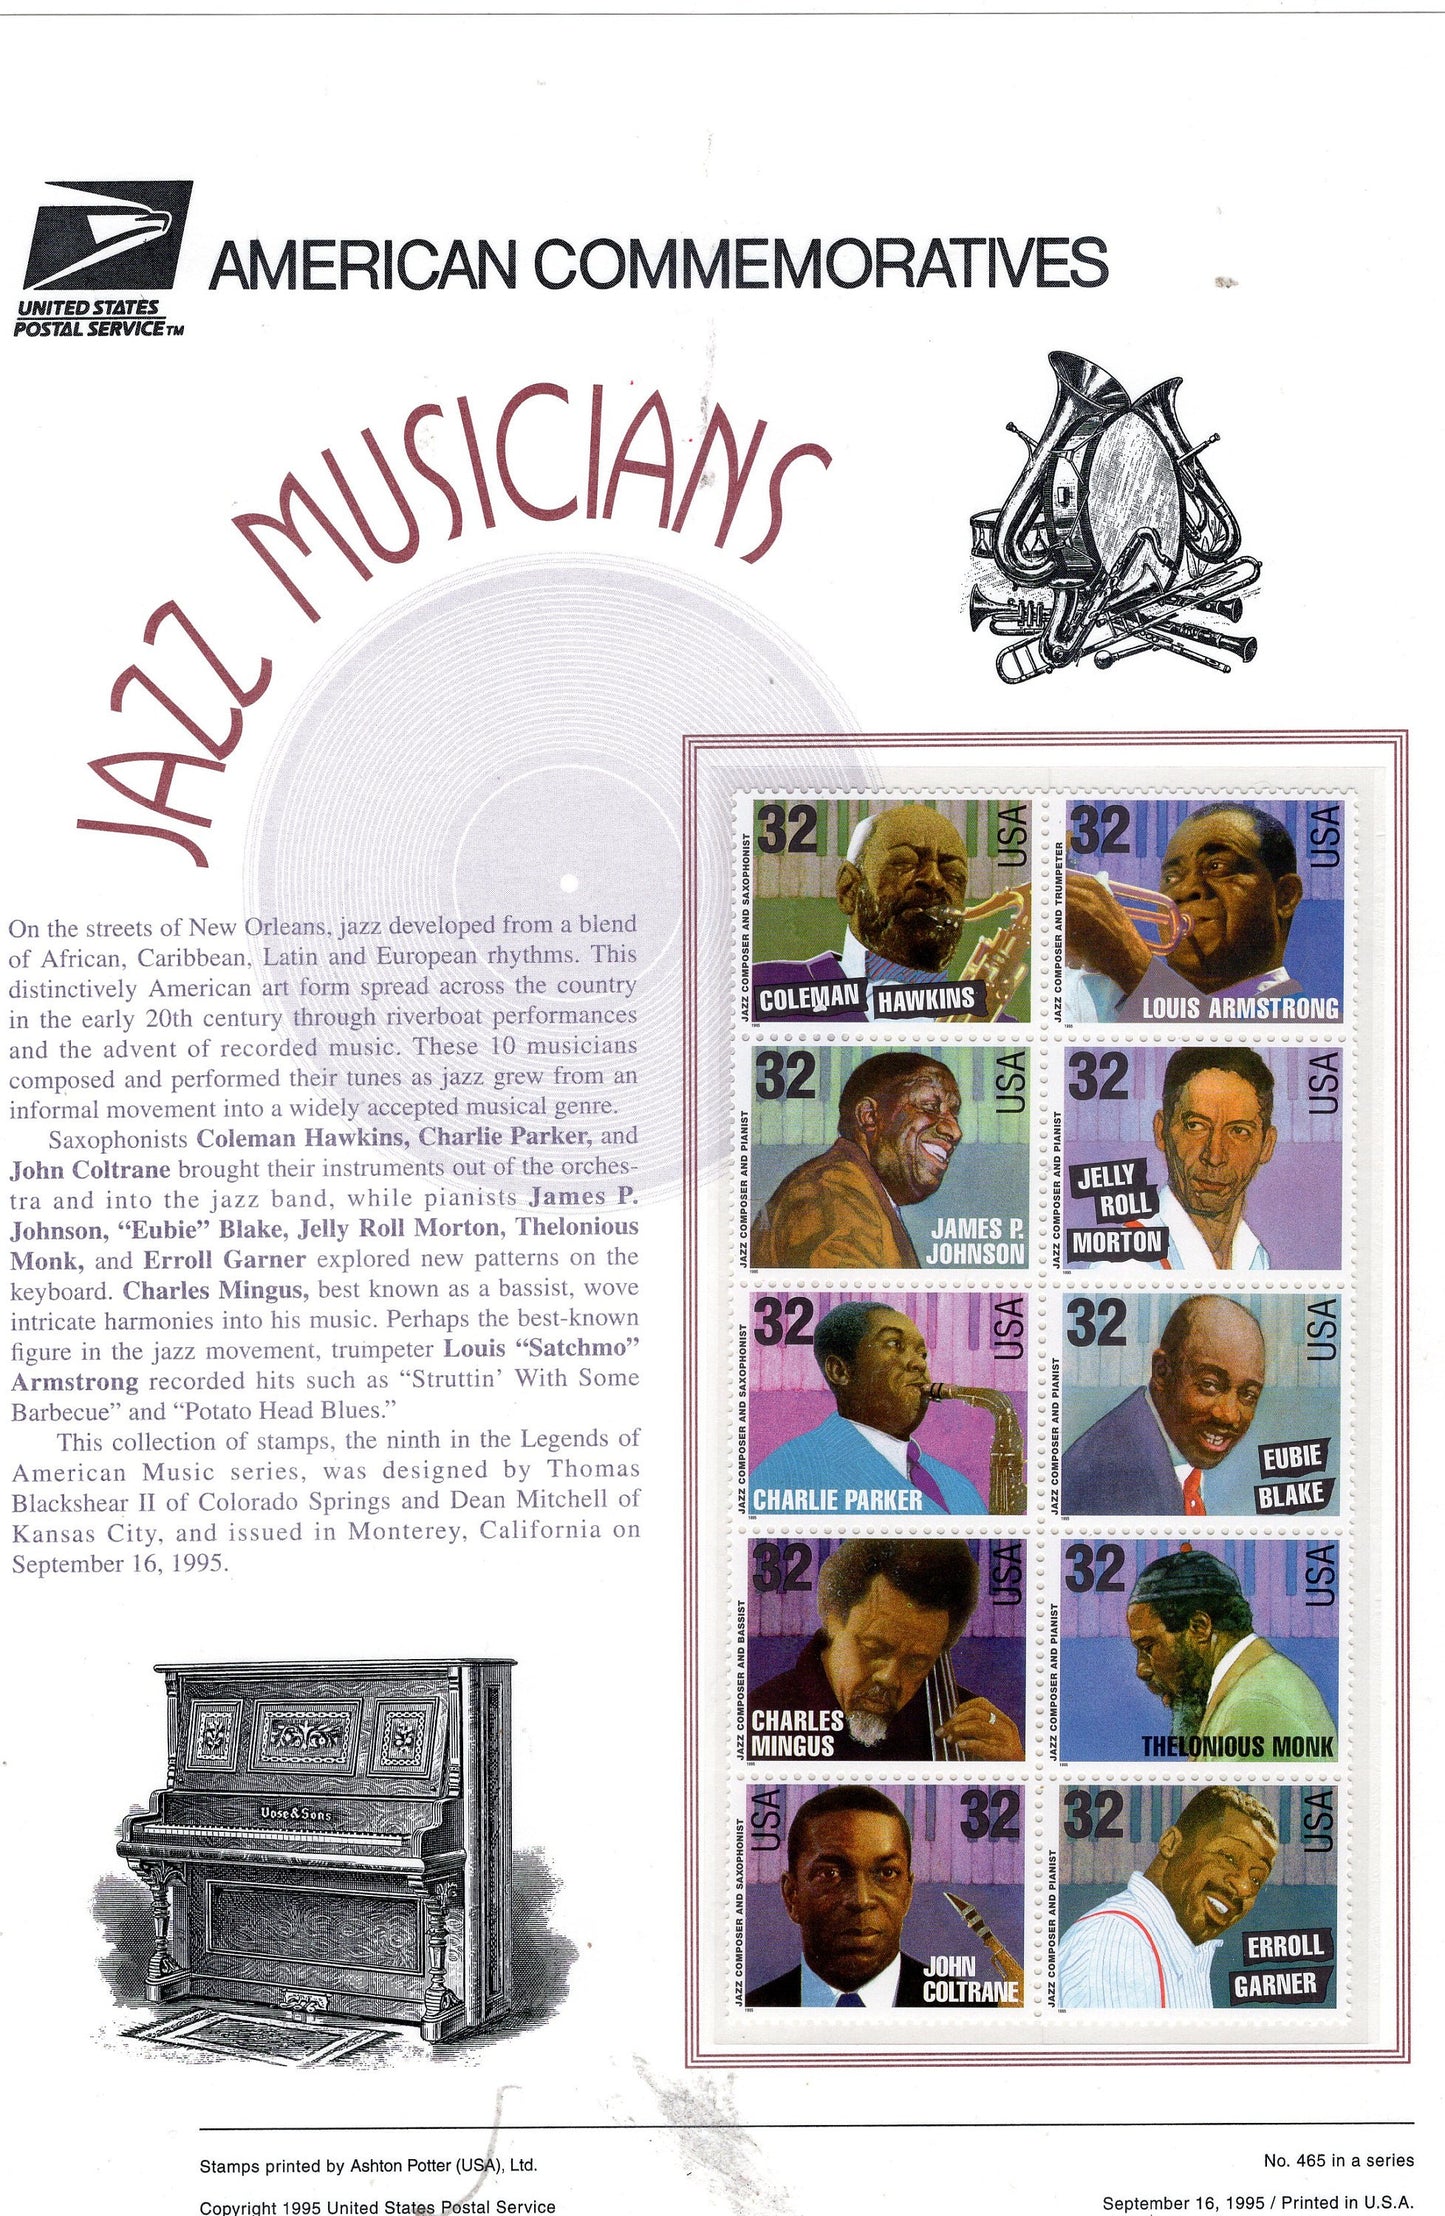 8 JAZZ MUSICIANS Black Heritage inc PARKER Music Commemorative Panel with a Block of 4 Stamps Illustrations plus Text – A Great Gift 8.5x11-95 FreeShpUSA